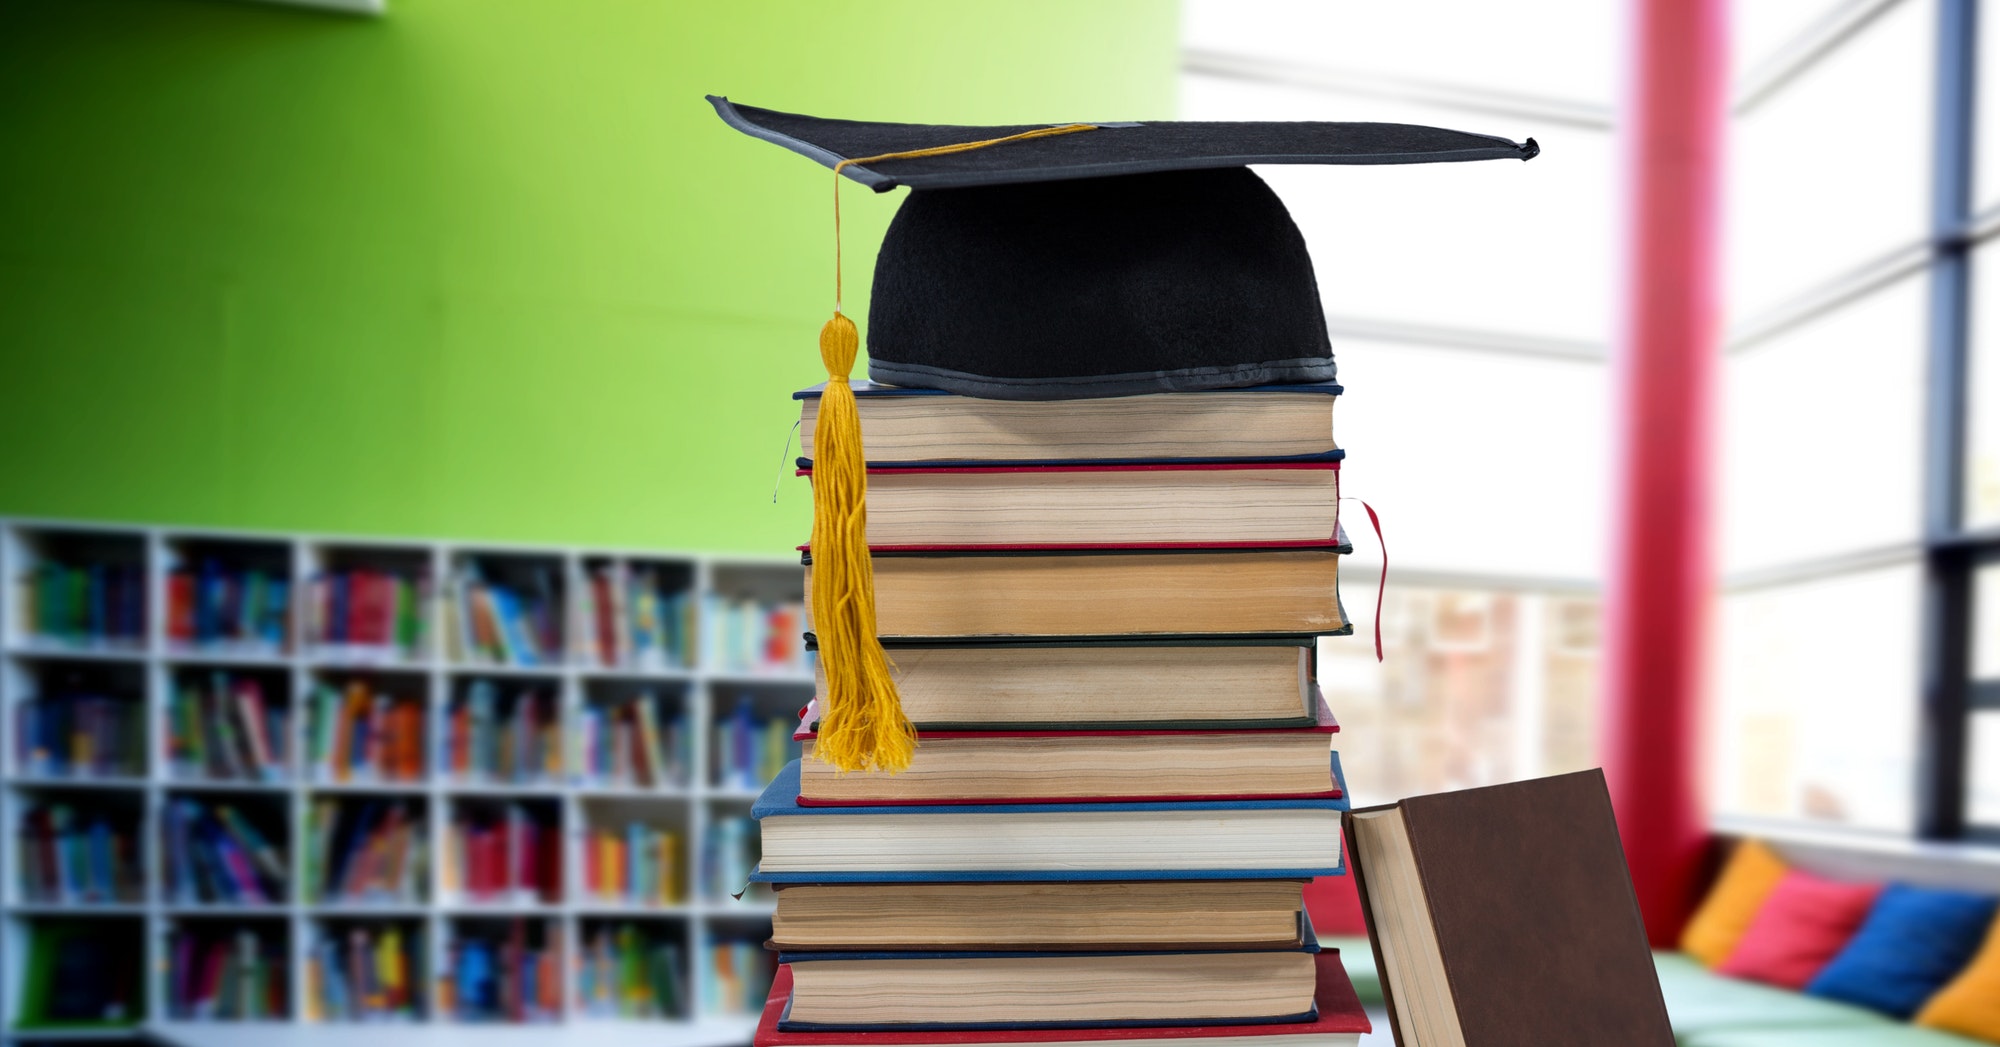 Books and graduation hat in education library